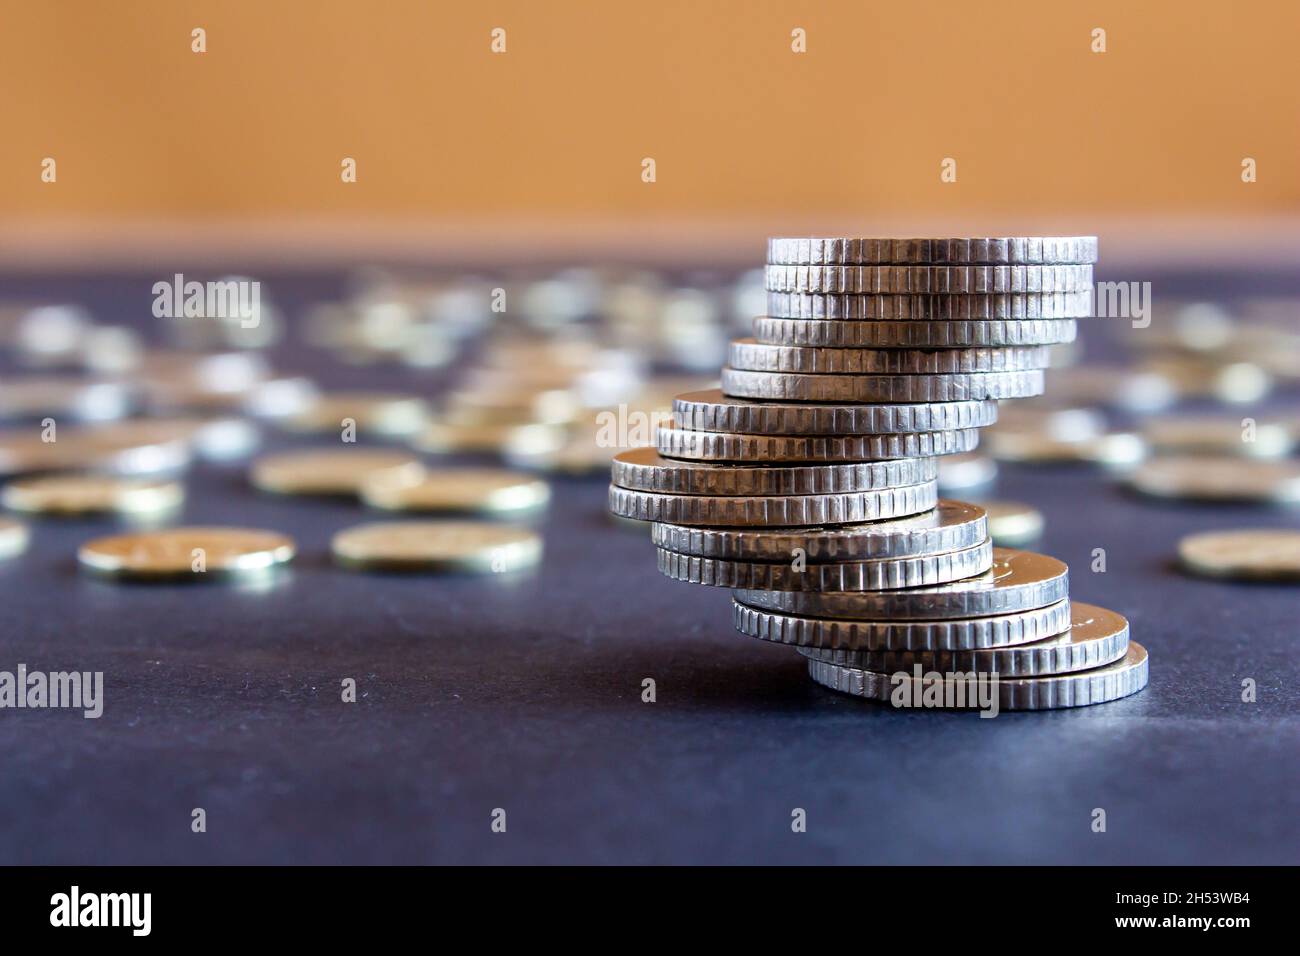 Turkish money coins, stack of Turkish lira coins on table. Business growth and risk concept. Stock Photo